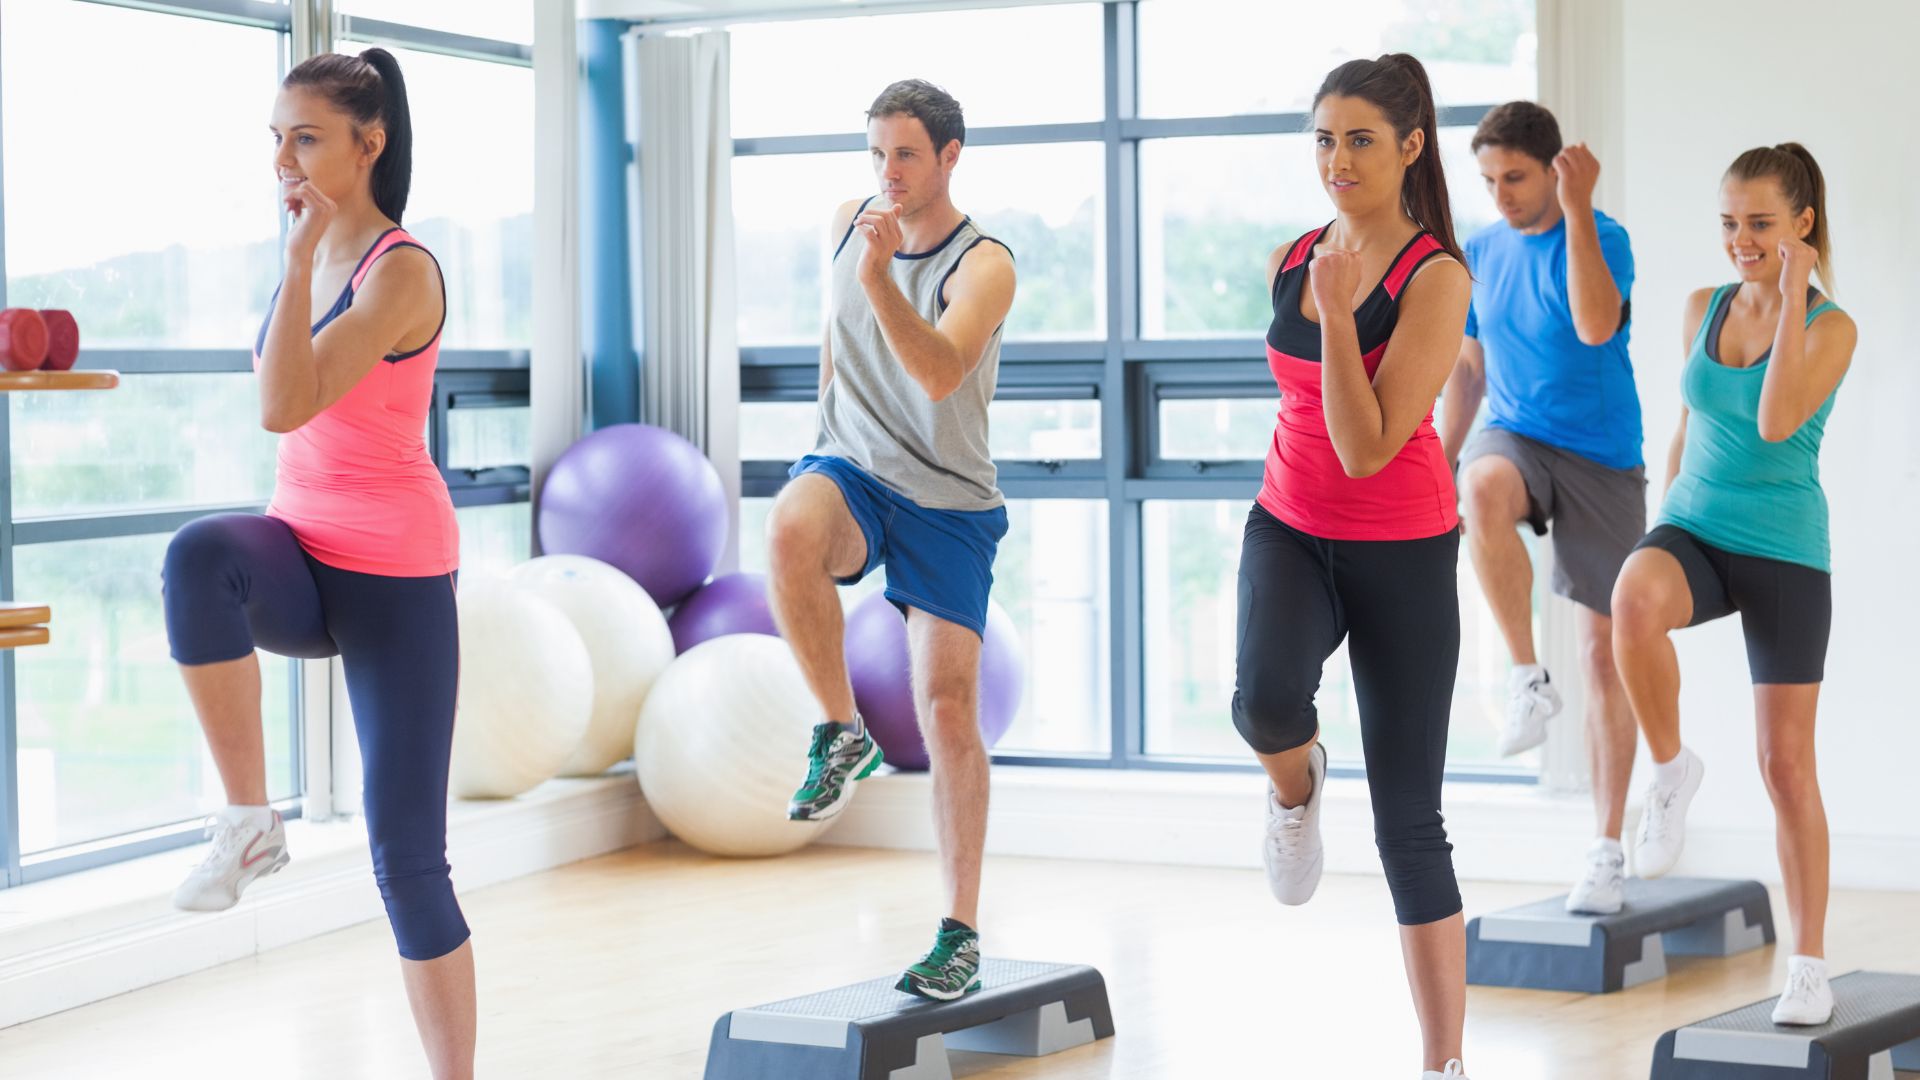 Trying Weight Loss? Can Aerobics Really Help You Lose Weight?